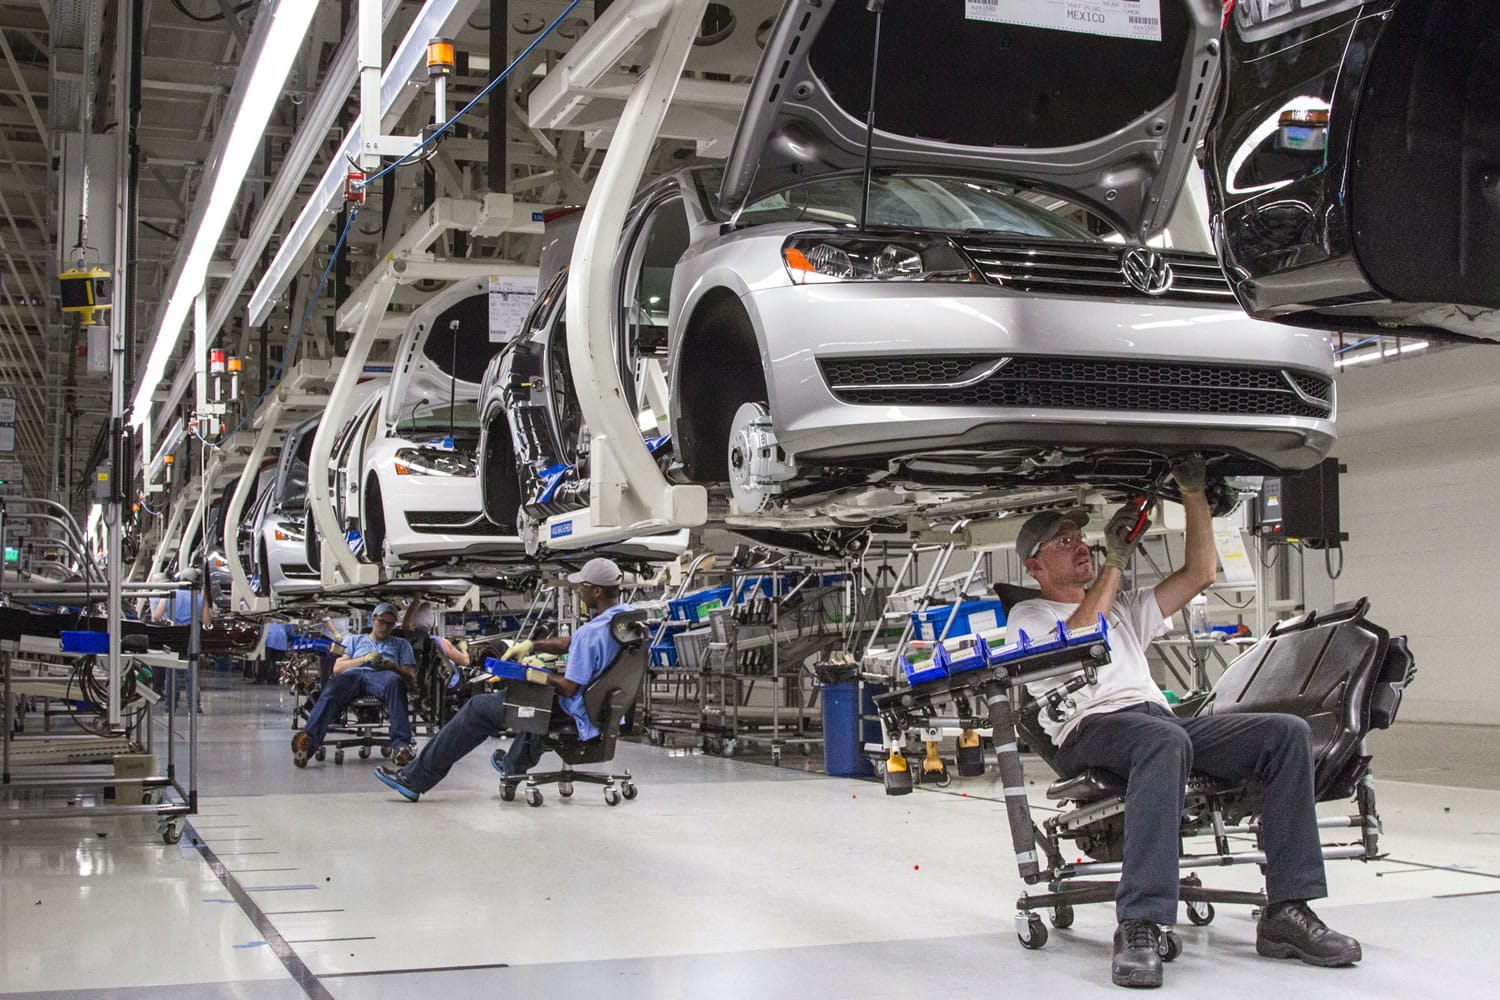 Employees at the Volkswagen plant in Chattanooga, Tenn., work on the assembly of a Passat sedan in 2013.